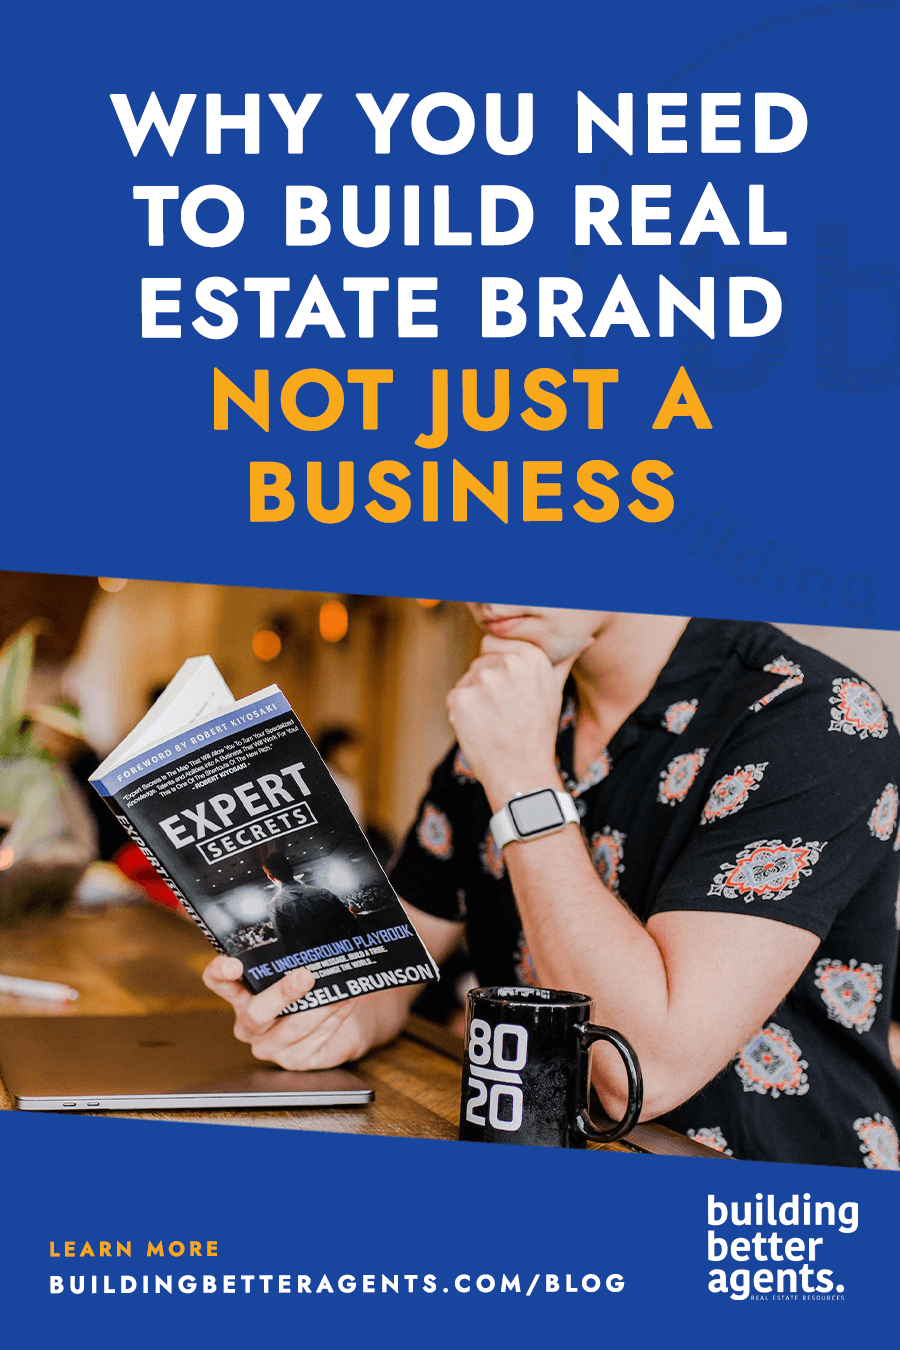 Why You Need to Build Real Estate Brand Not Just A Business